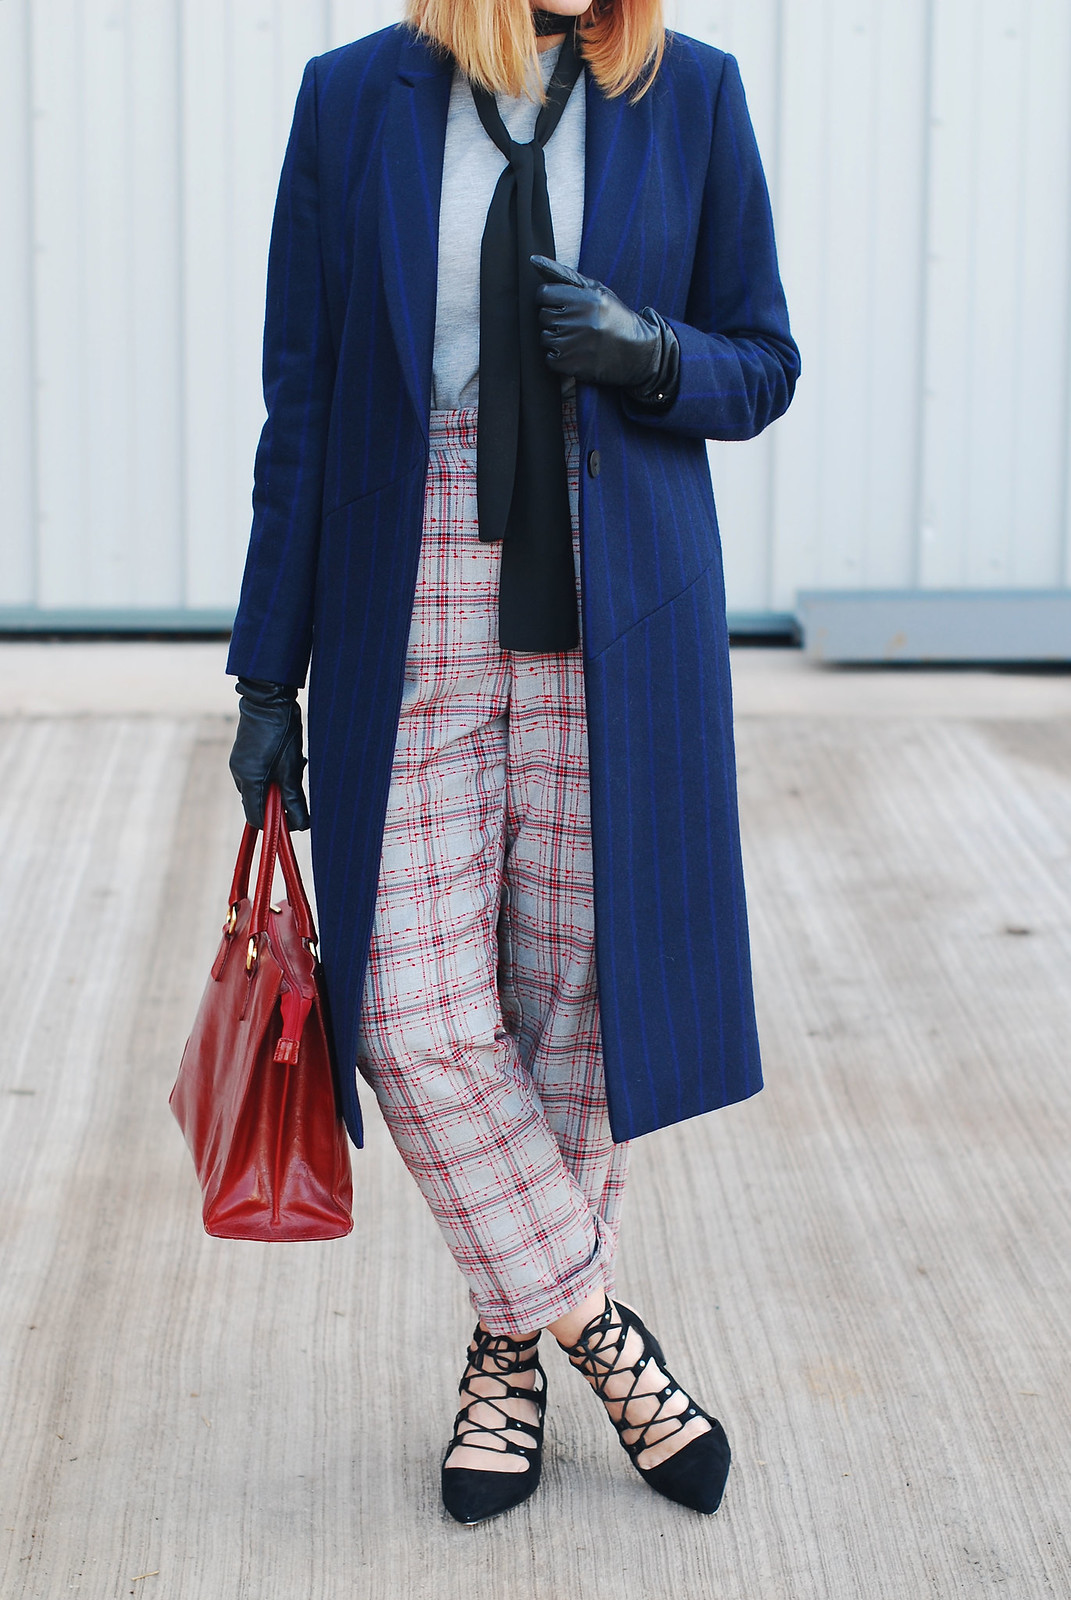 Smart autumn/winter outfit fall style long navy pinstripe coat, check trousers, heeled ghillie shoes and black skinny scarf | Not Dressed As Lamb, over 40 style